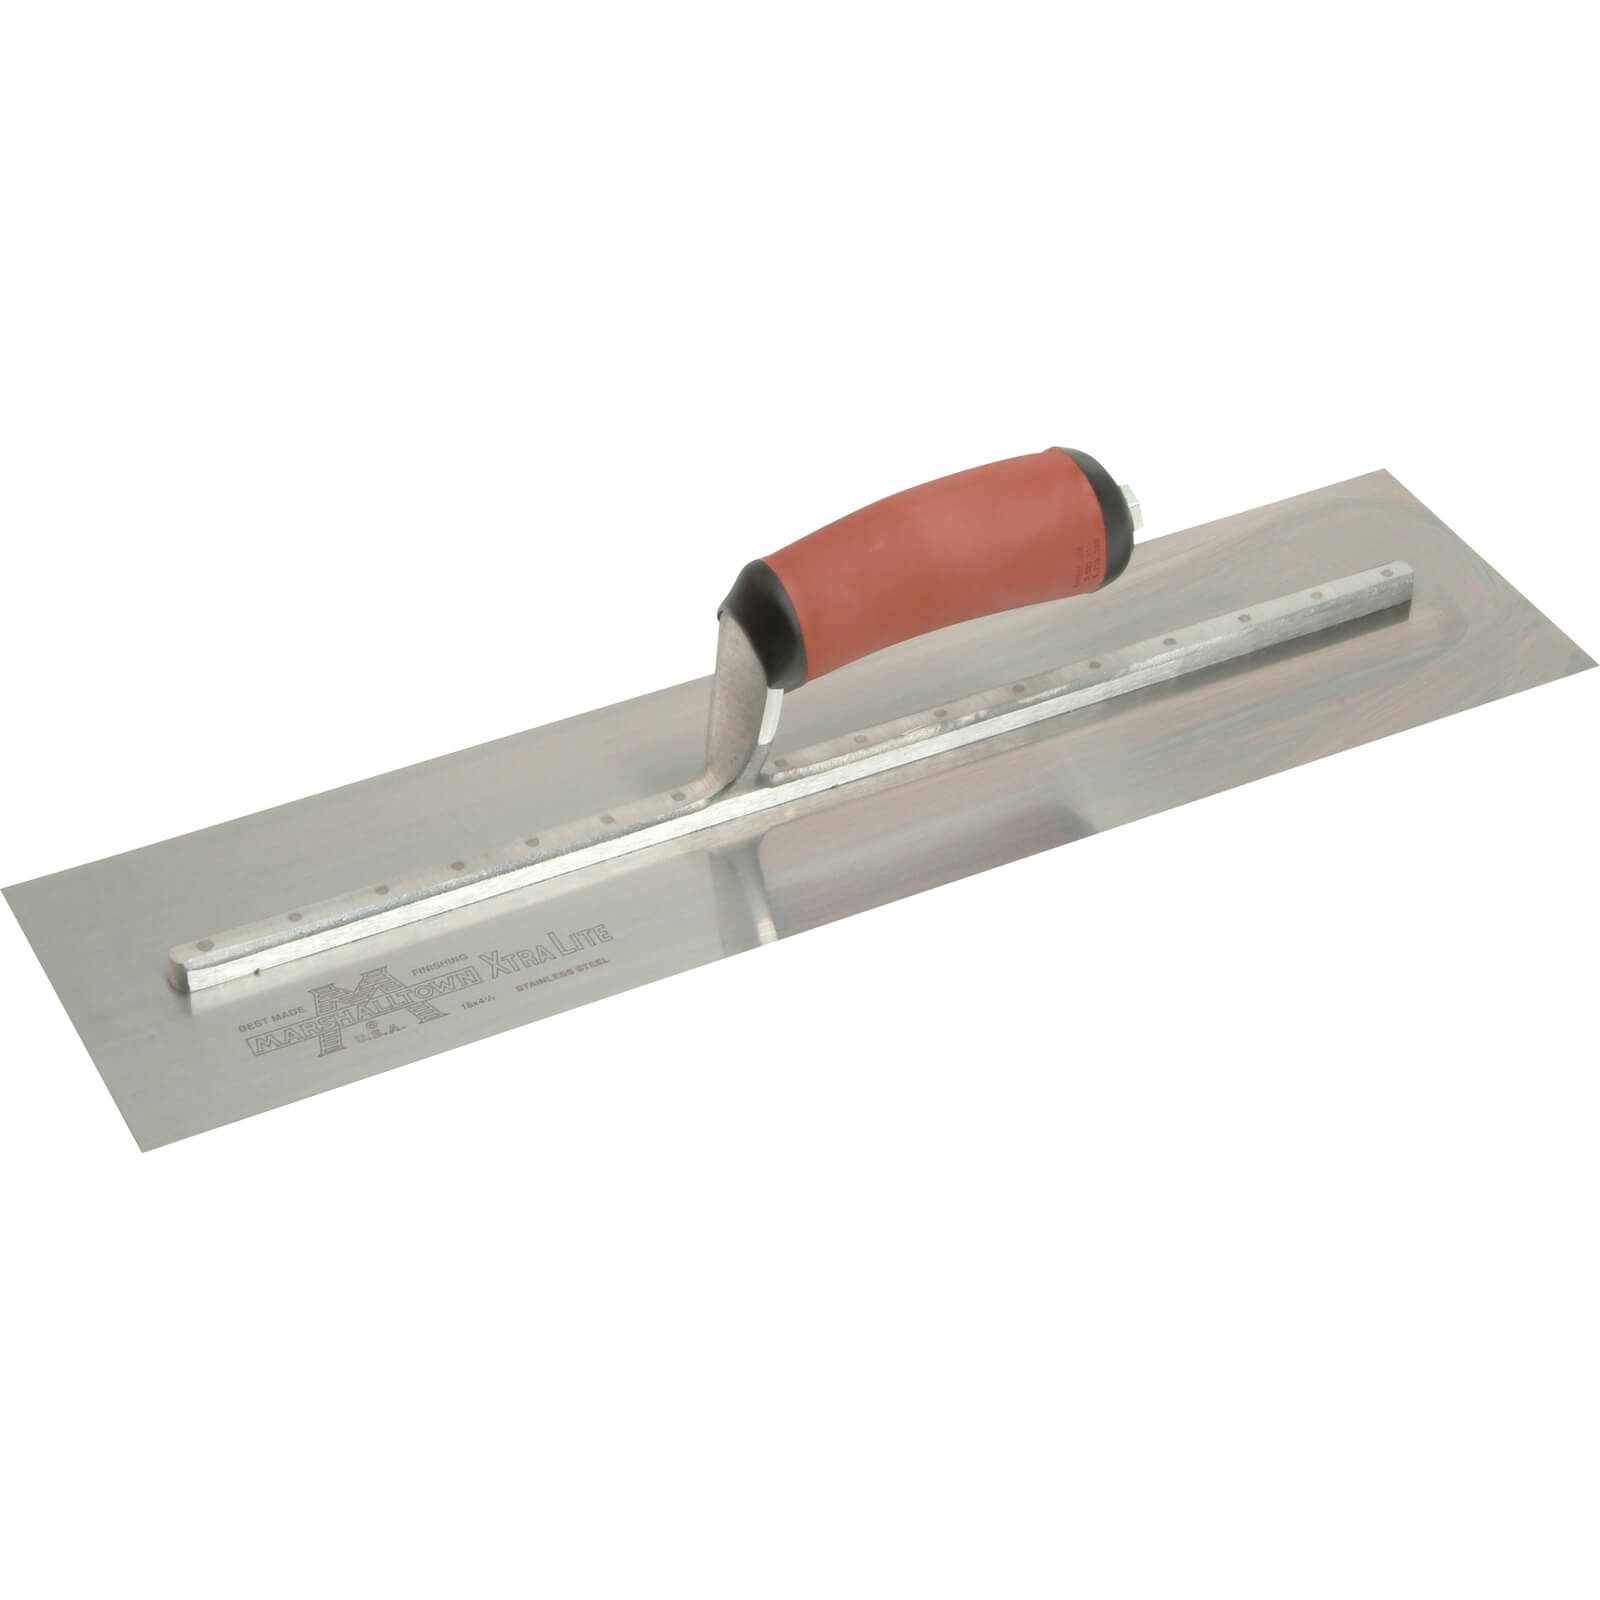 Image of Marshalltown Stainless Steel Cement Trowel 18" 4" 1/2"